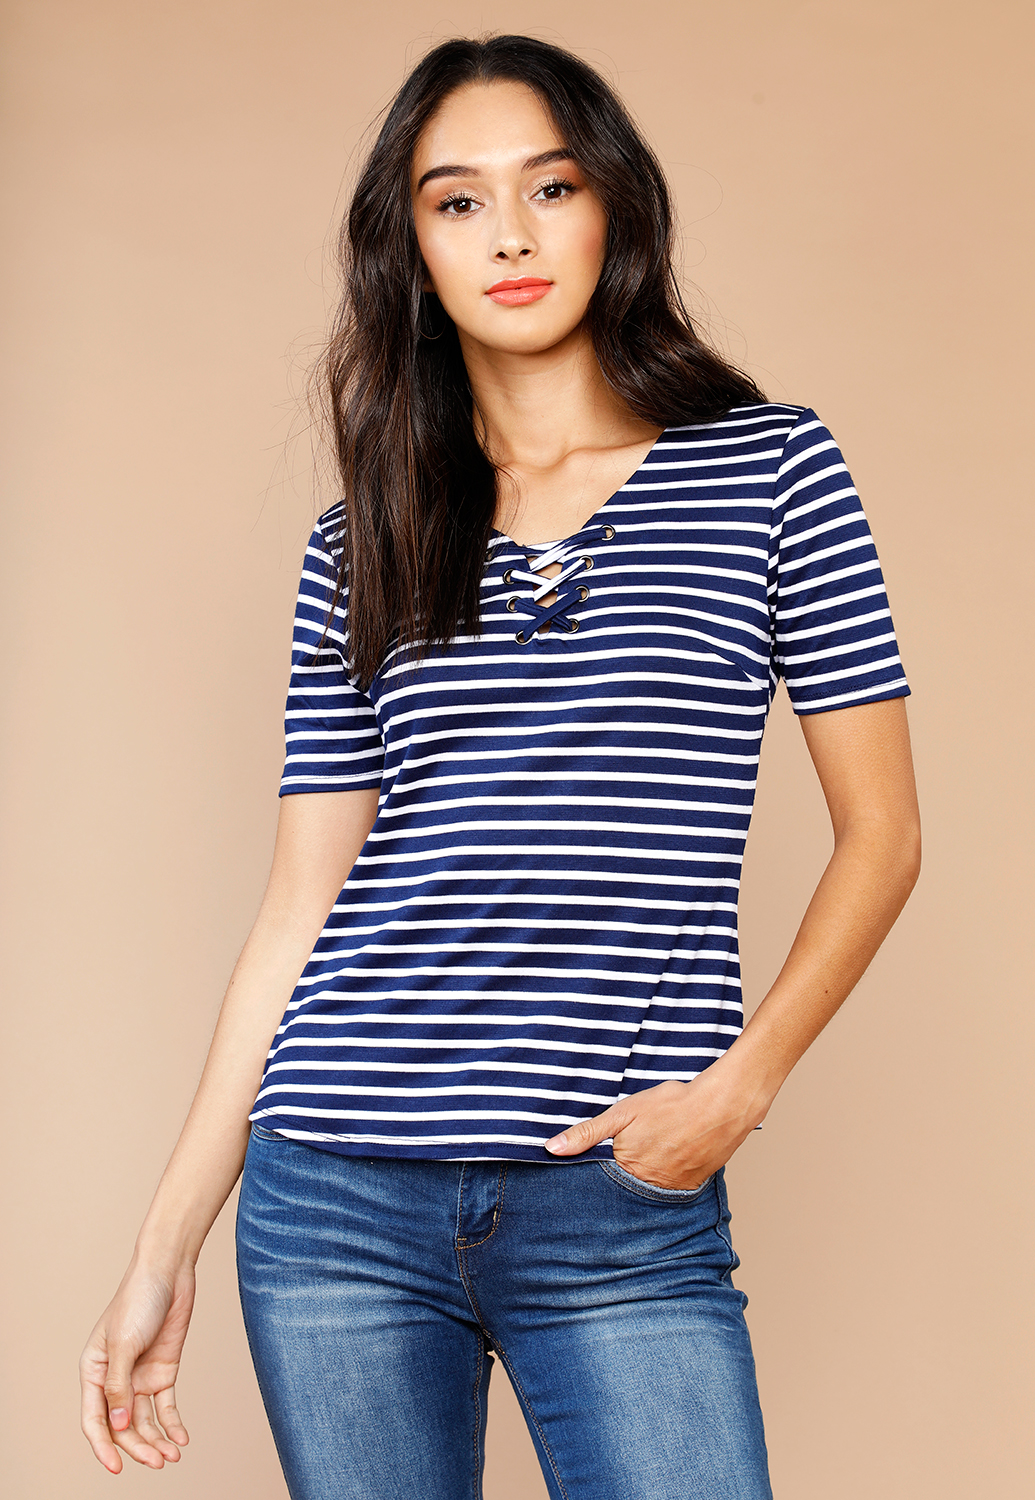 Lace Up Detail Striped Casual Top